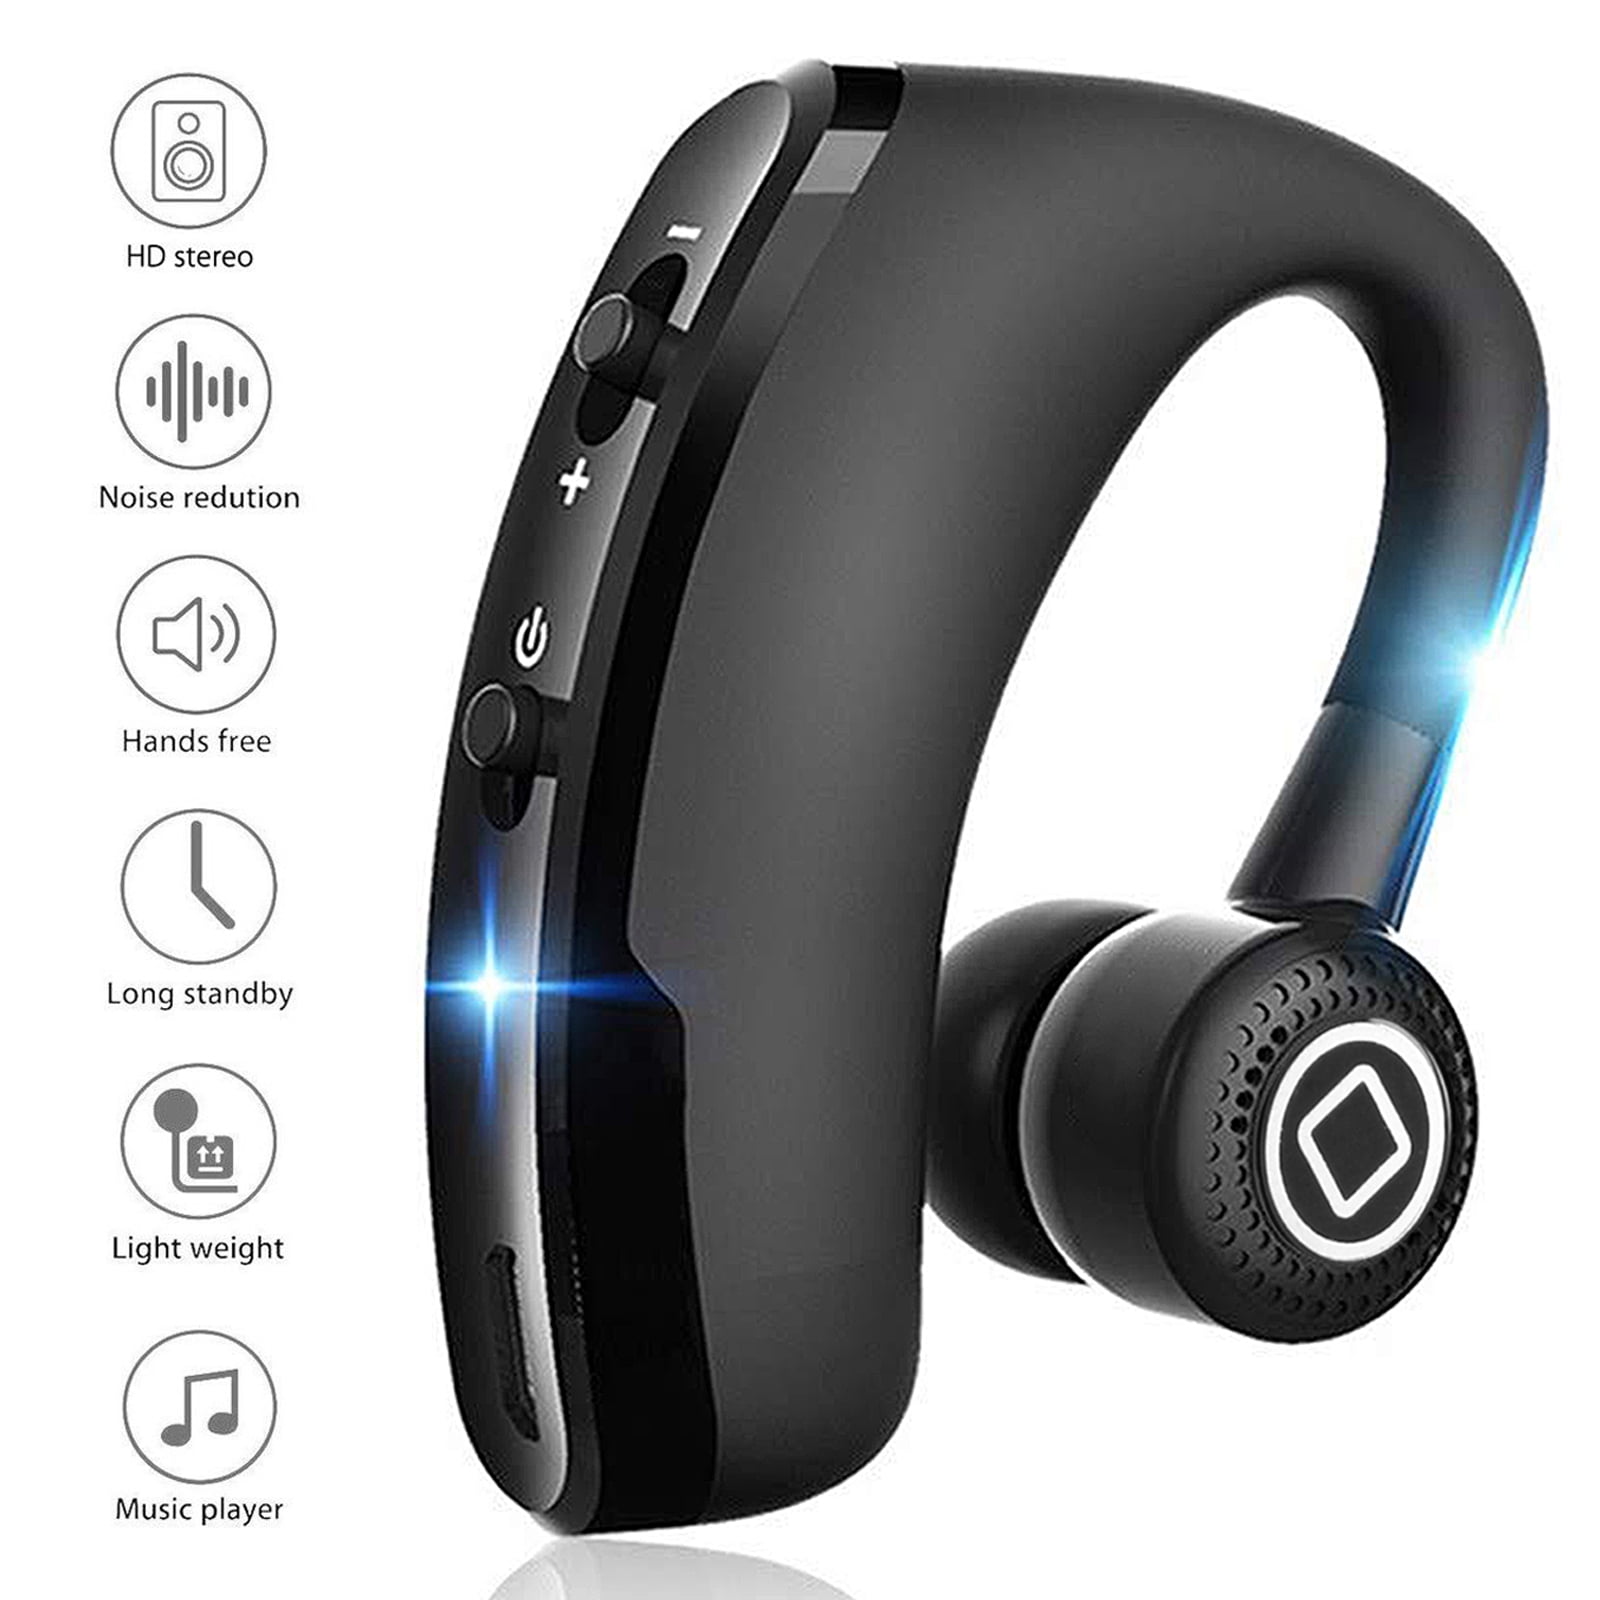 TSV Universal V9 Wireless Bluetooth 4.0 Single Headset Sports Headphone Earphone Handsfree(Fit for Right and Left Ear)